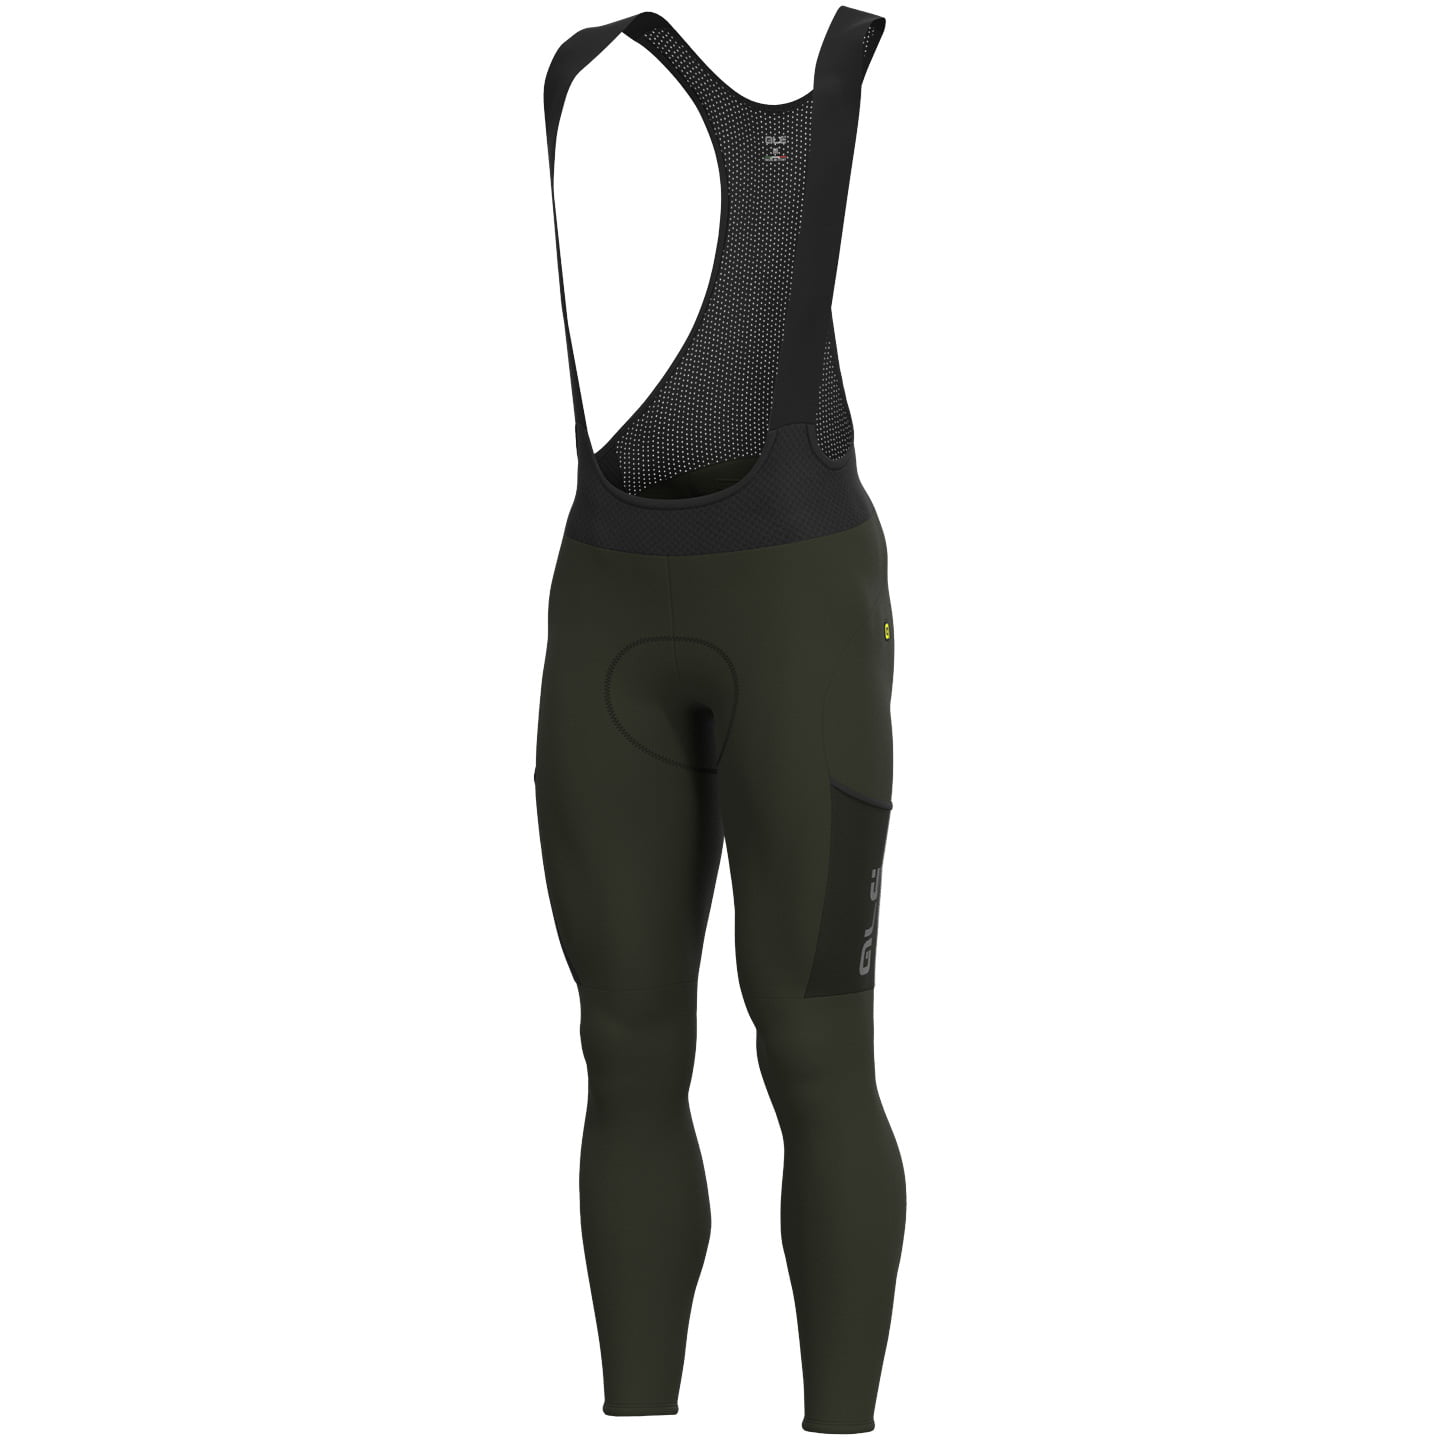 ALE Stones Cargo Bib Tights Bib Tights, for men, size 2XL, Cycle tights, Cycling clothing